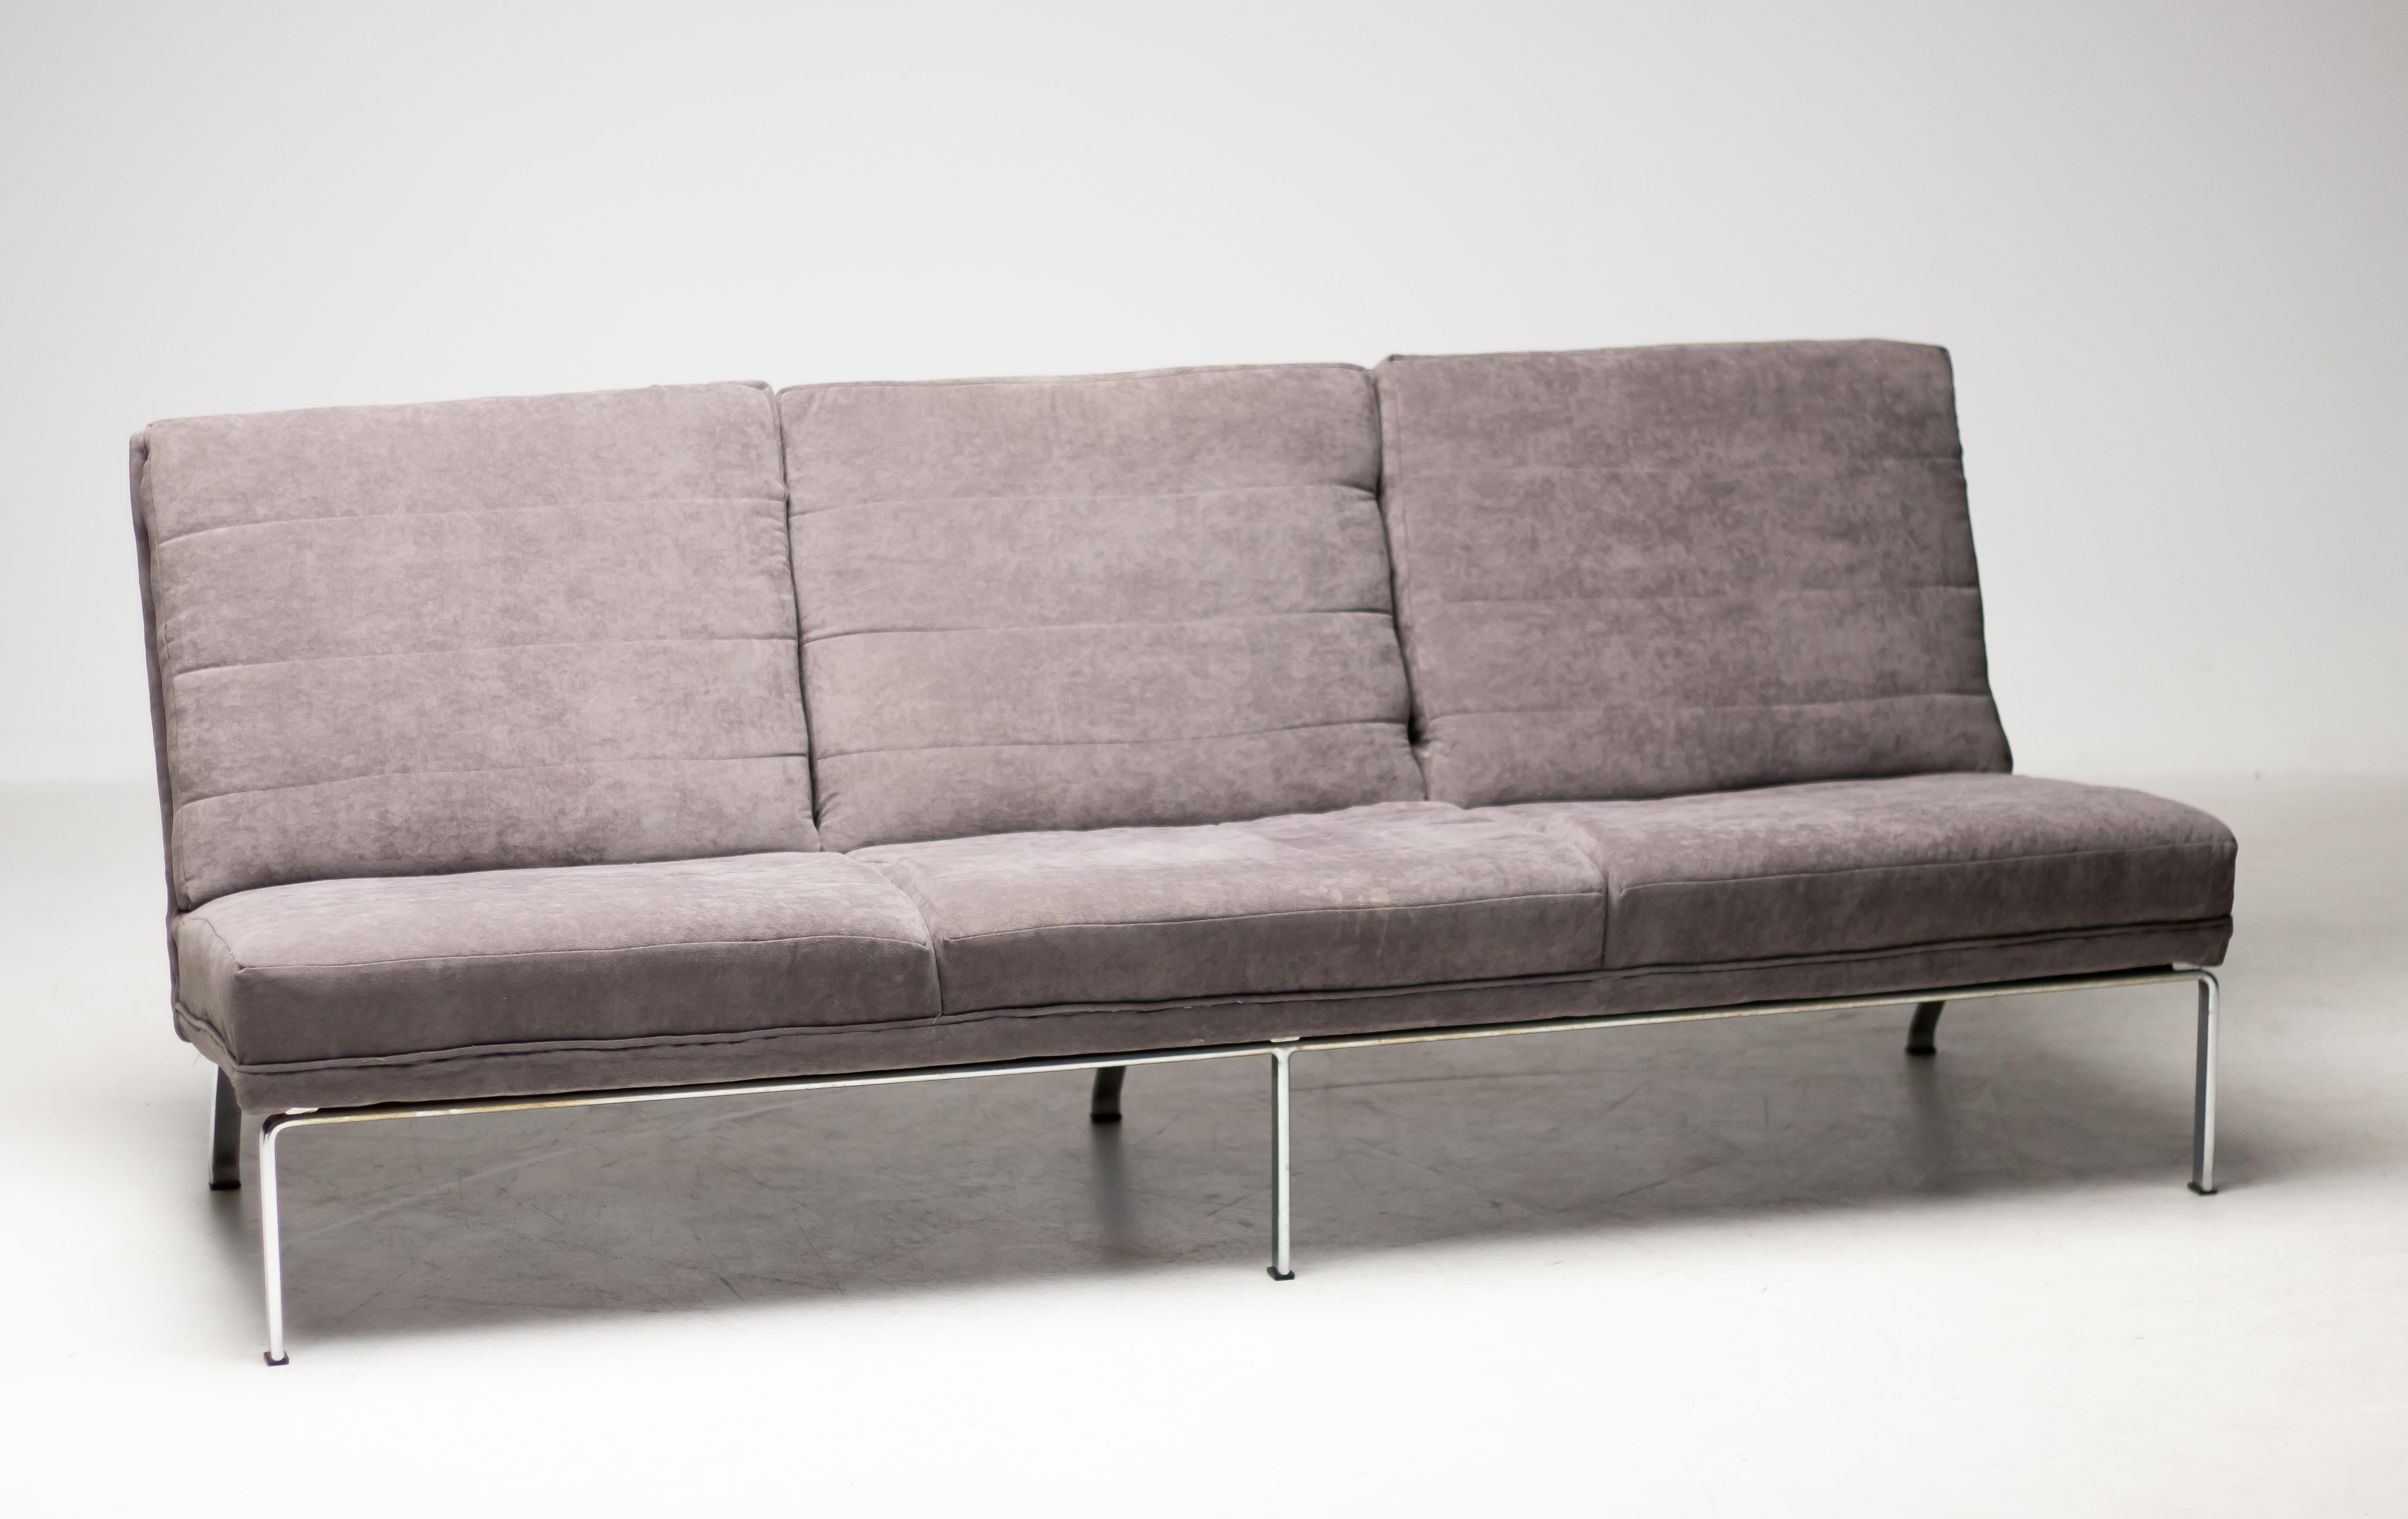 Rare three-seat sofa designed in 1965 by Horst Brüning for Kill International.
Clear design with a sculptural flat chromed steel base.